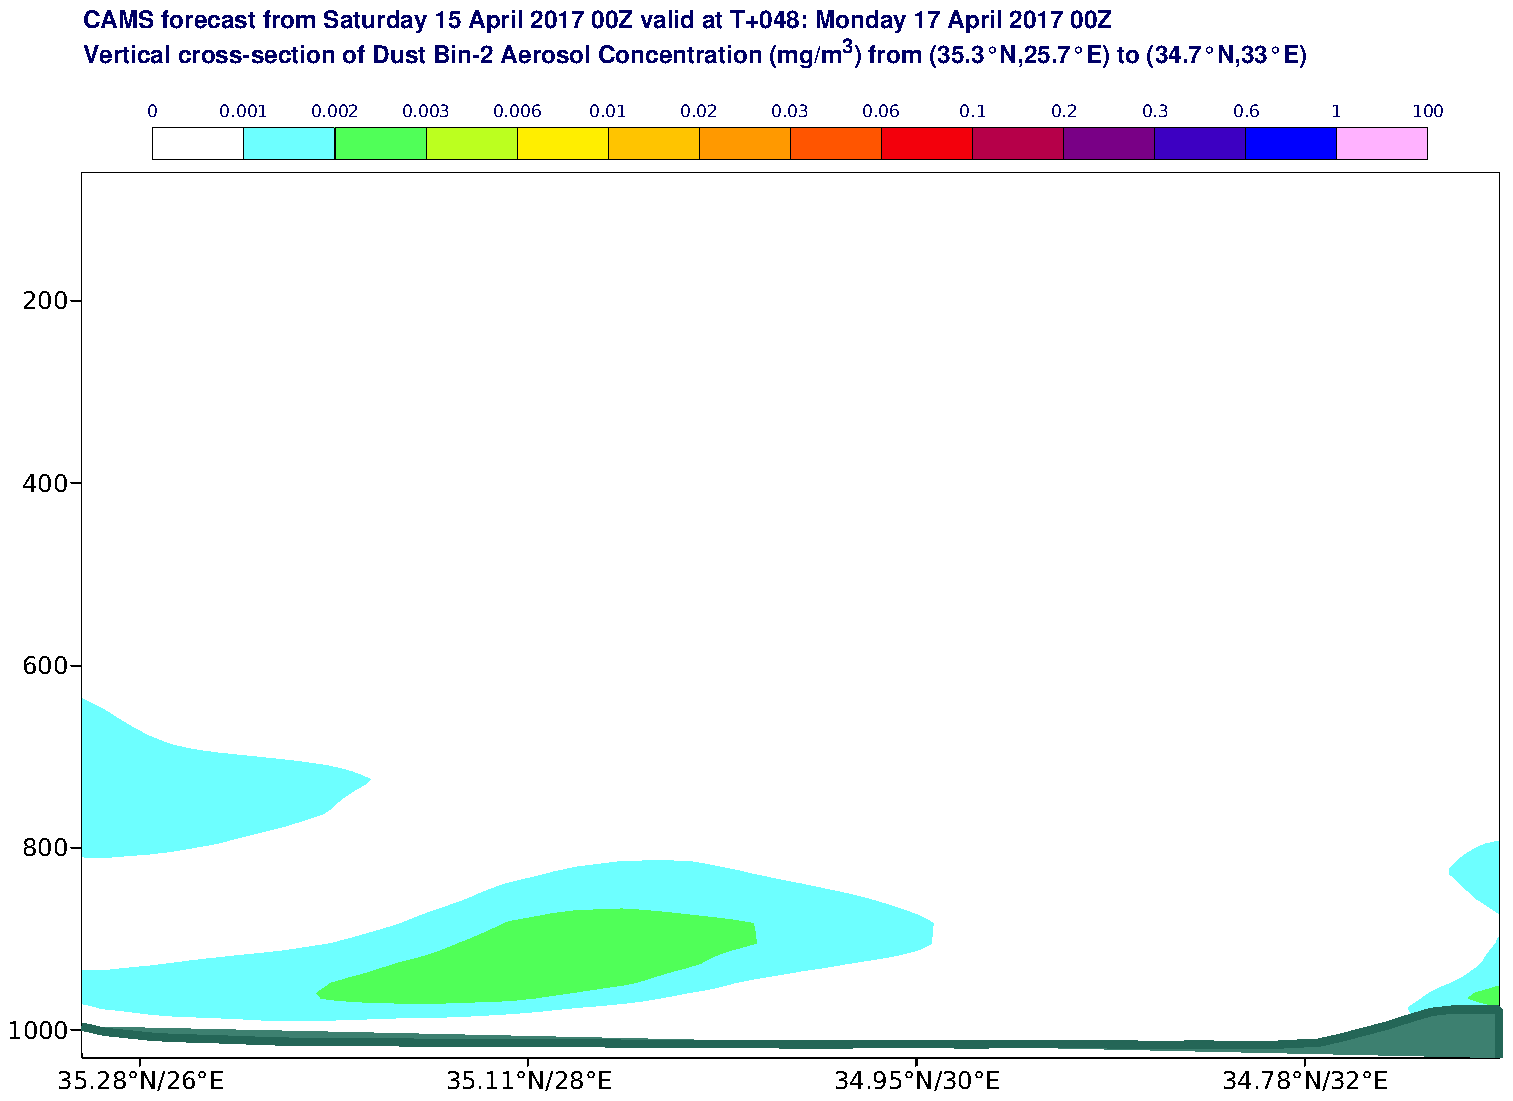 Vertical cross-section of Dust Bin-2 Aerosol Concentration (mg/m3) valid at T48 - 2017-04-17 00:00